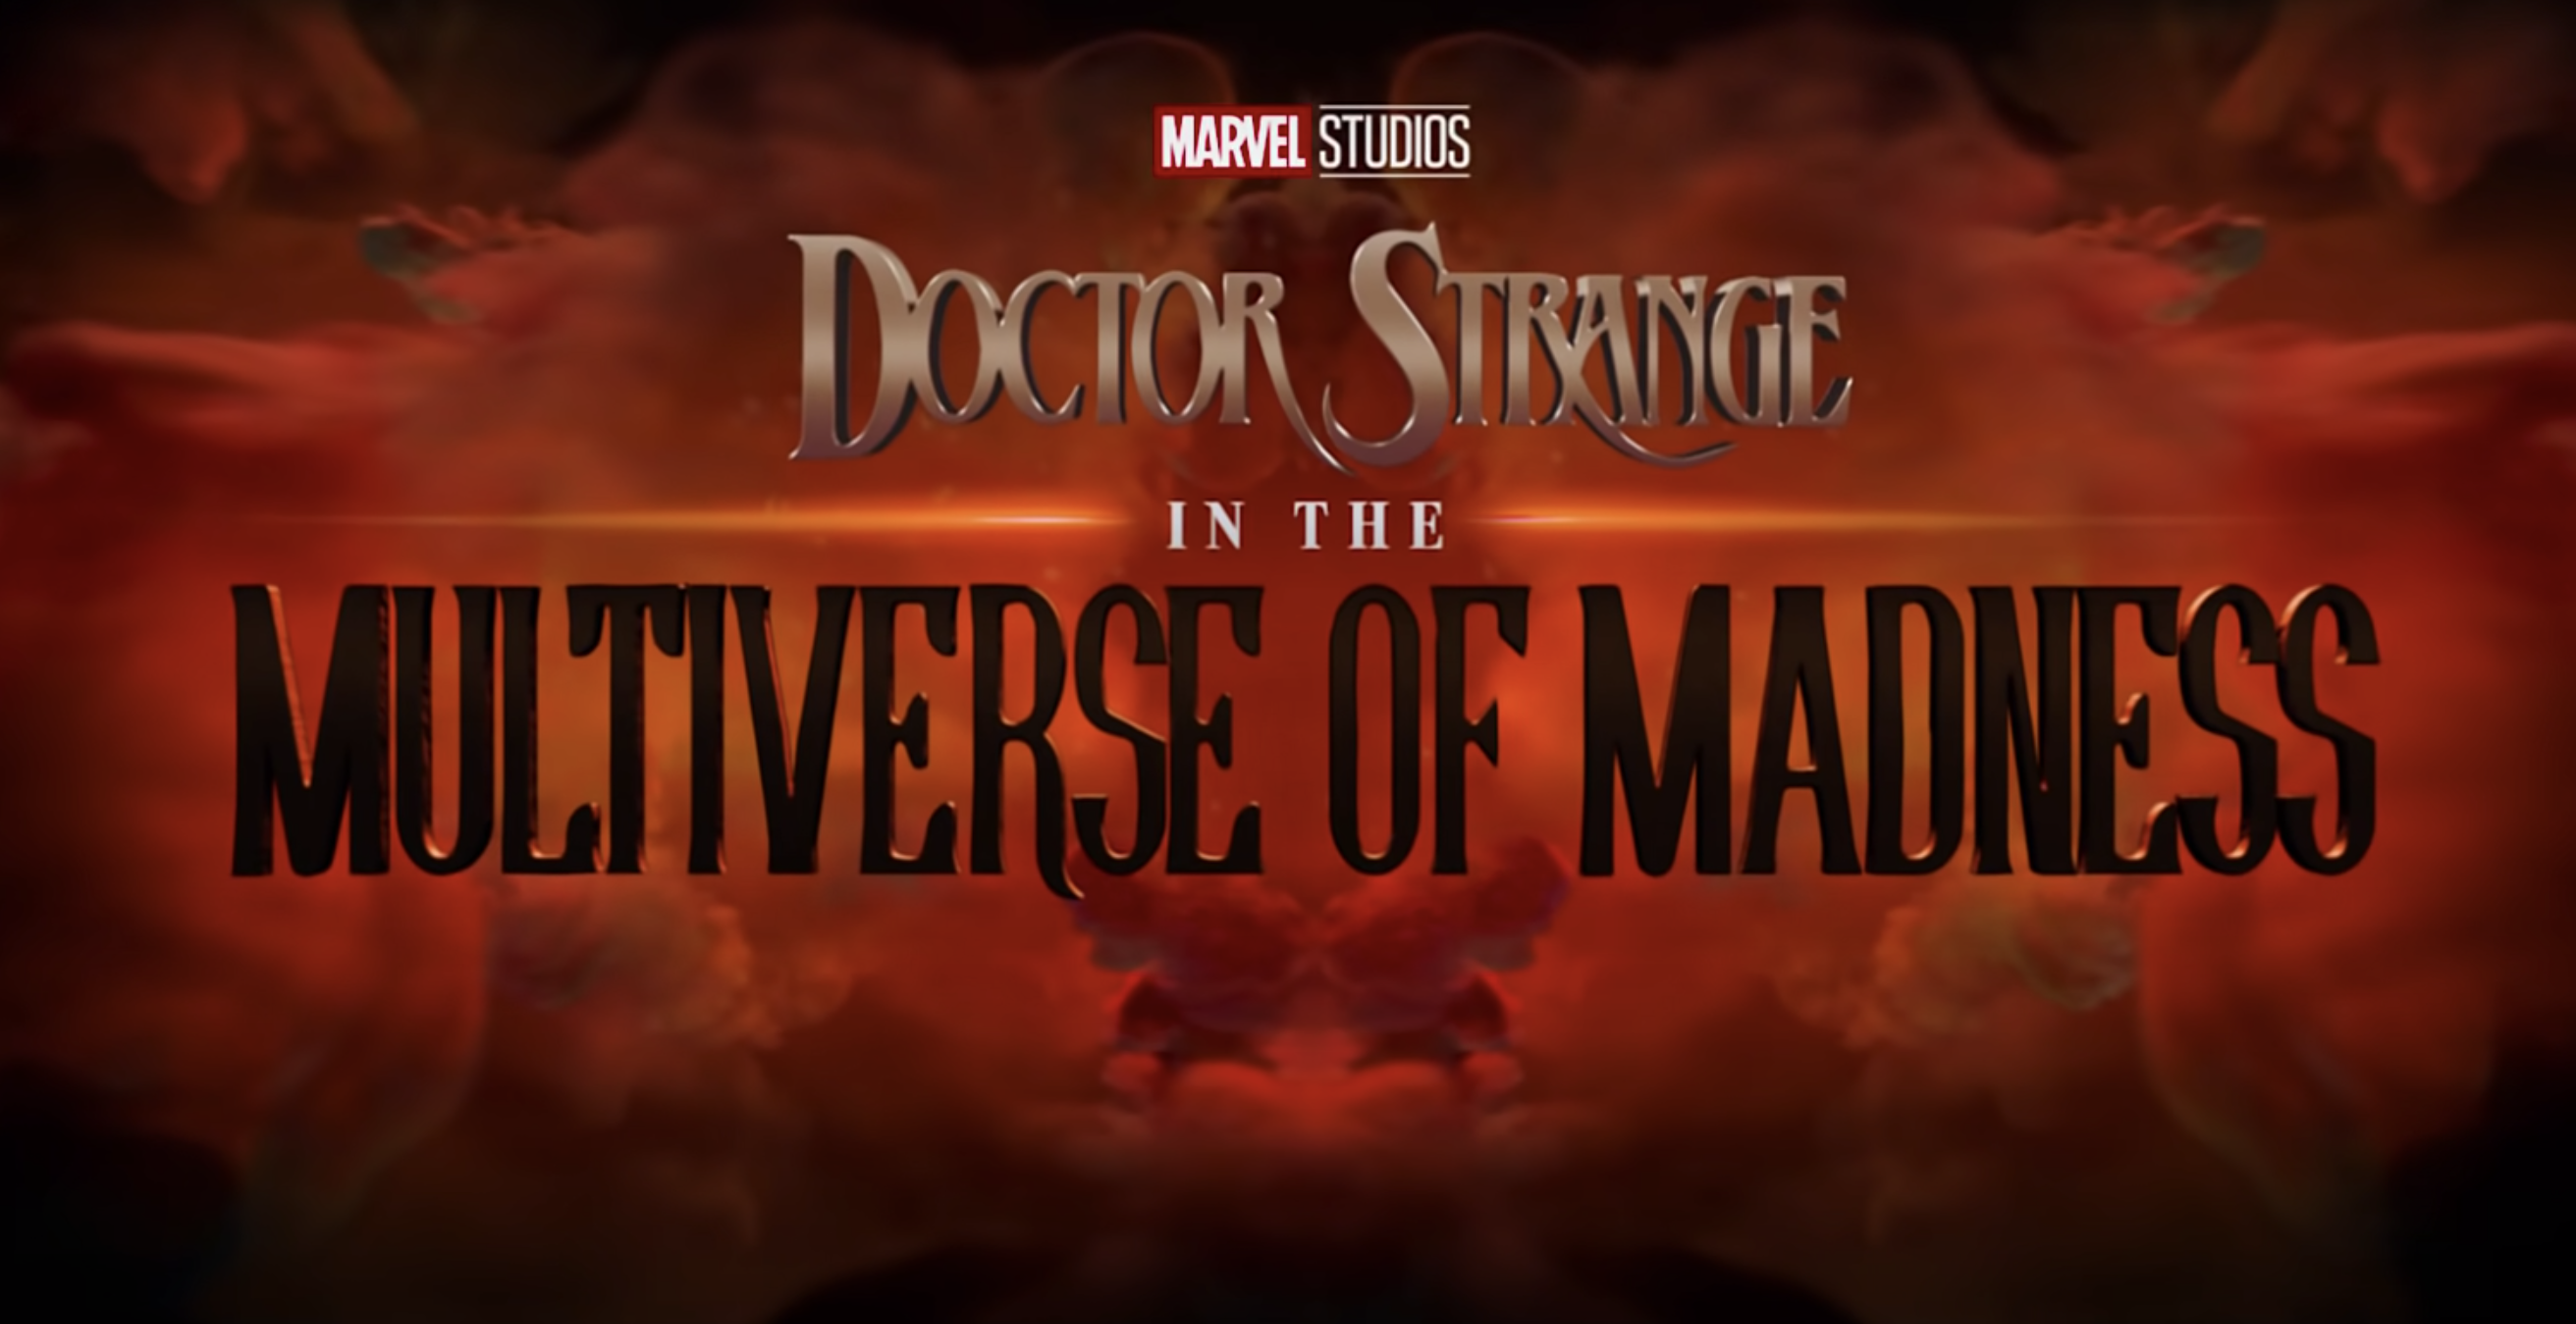 The logo for Doctor Strange in the Multiverse of Madness, one of the upcoming marvel movies